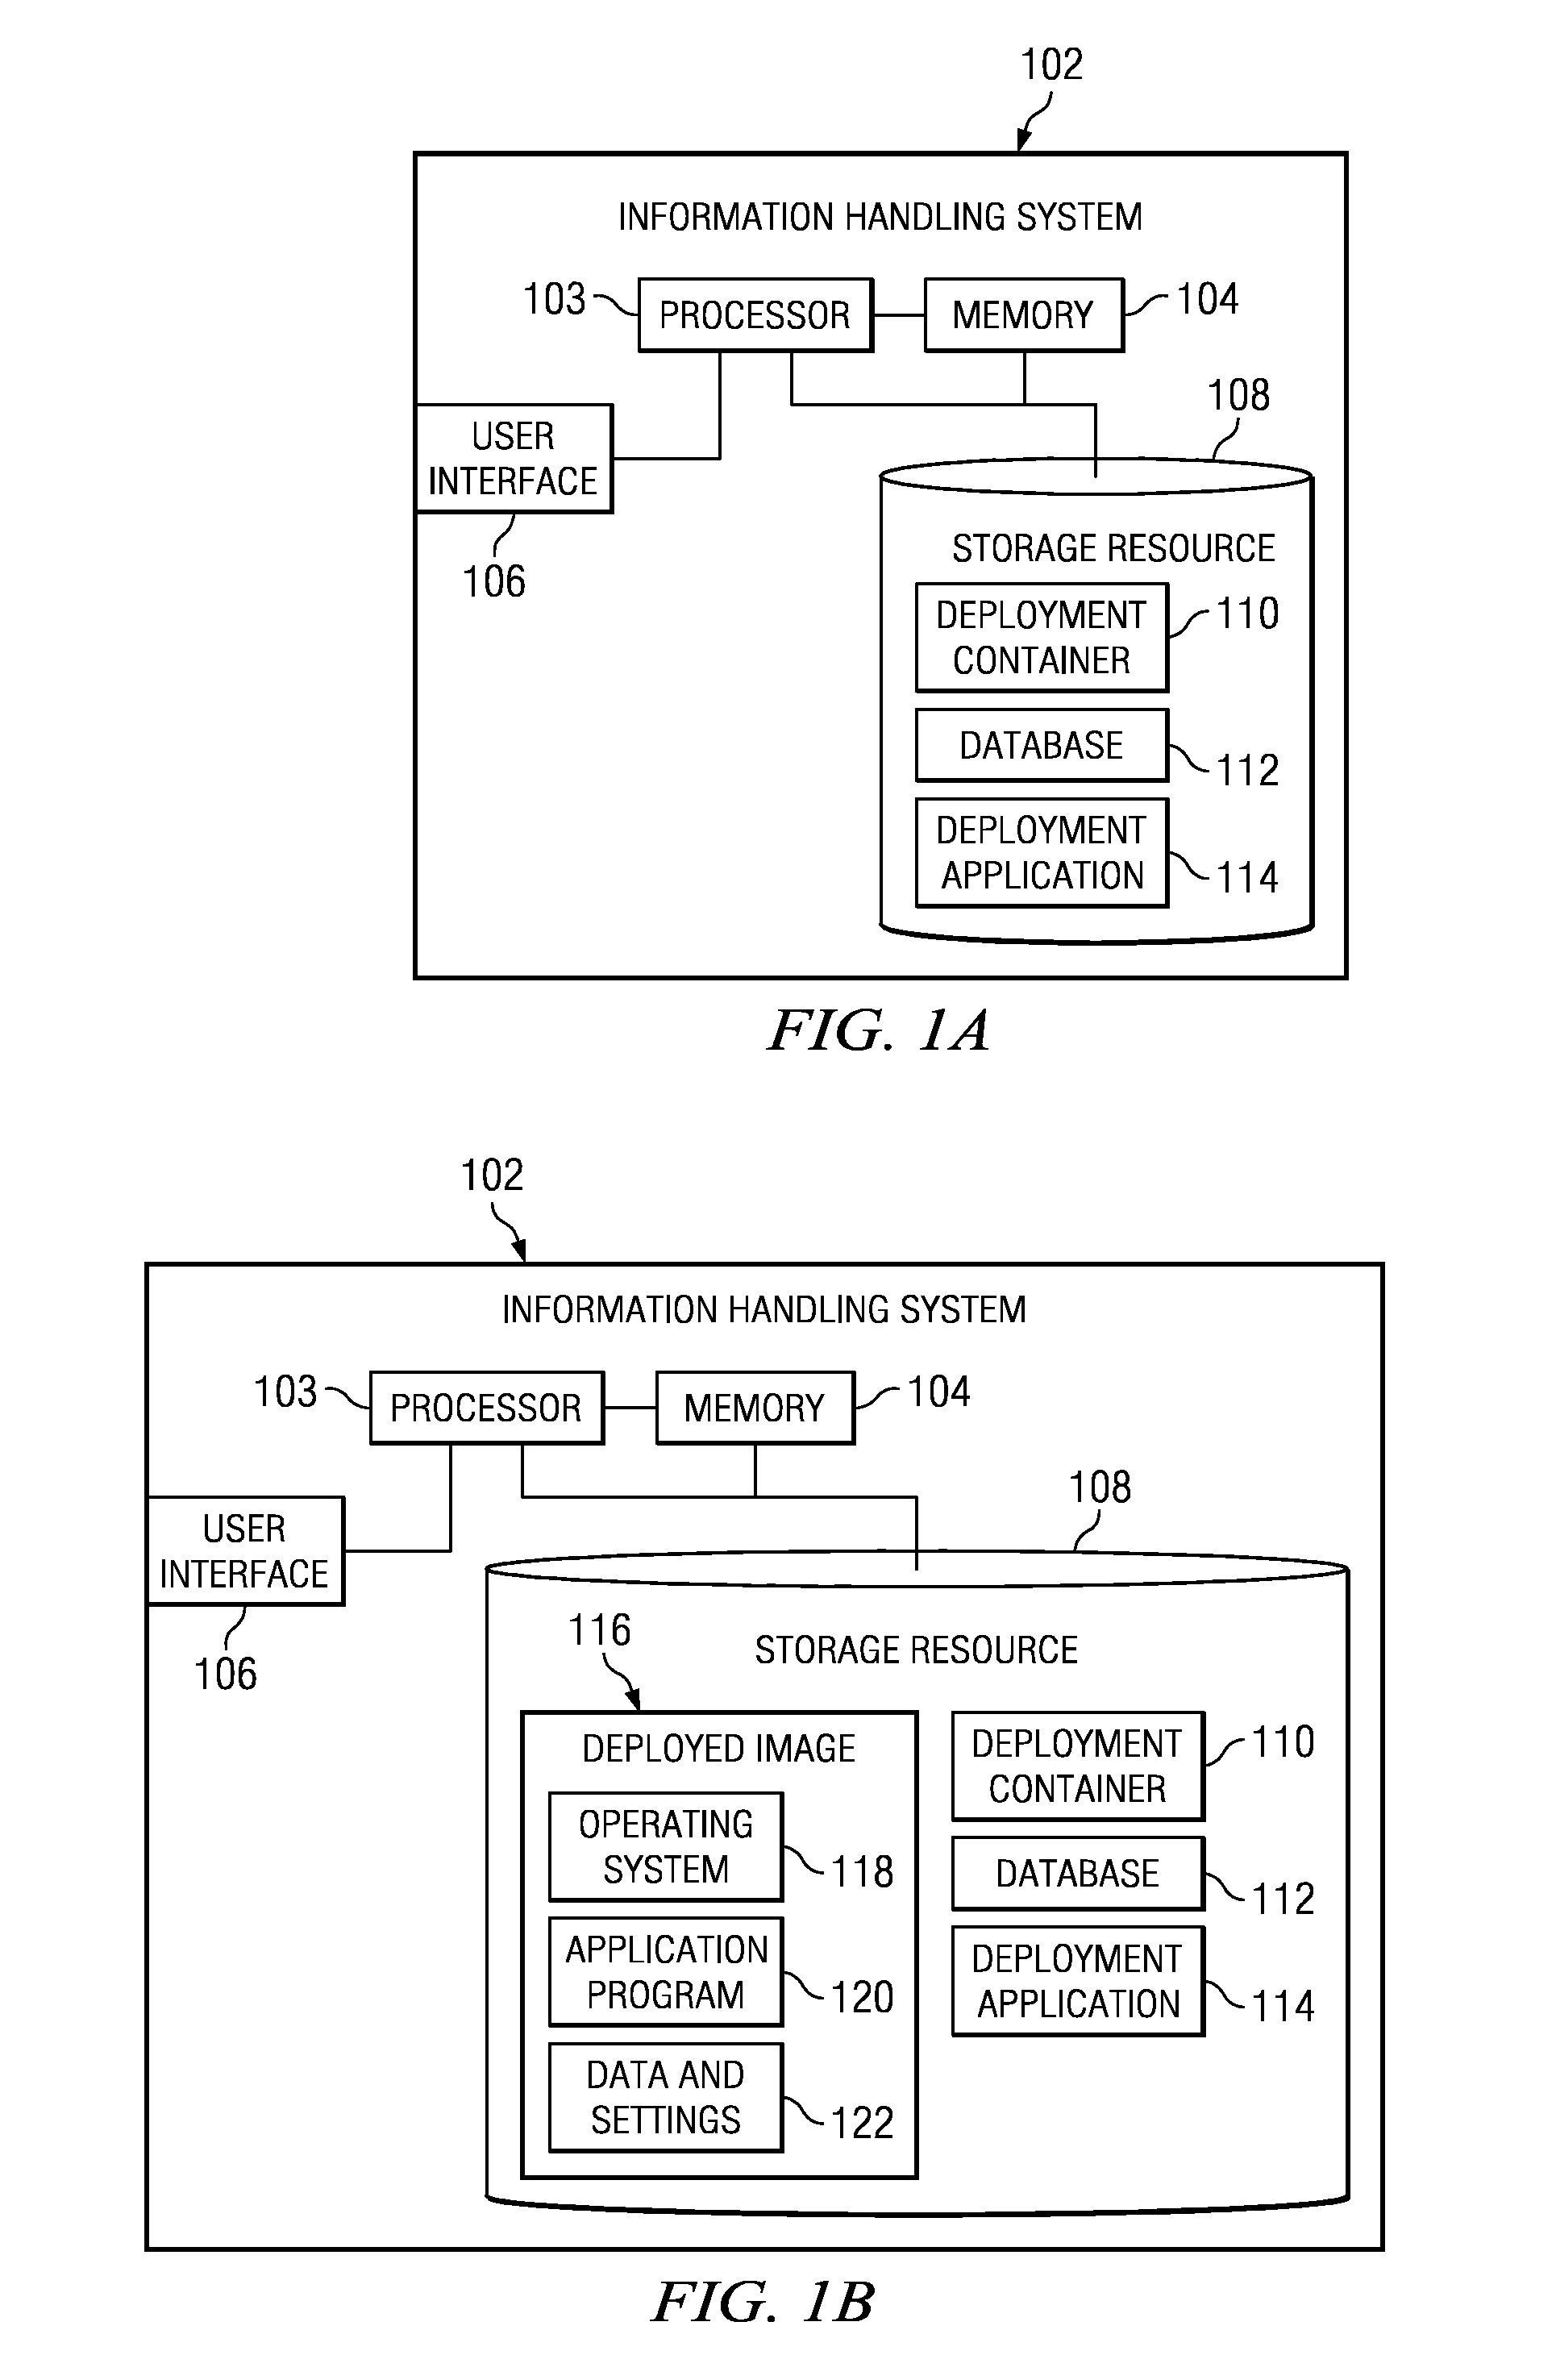 System and Method for Automated Deployment of an Information Handling System